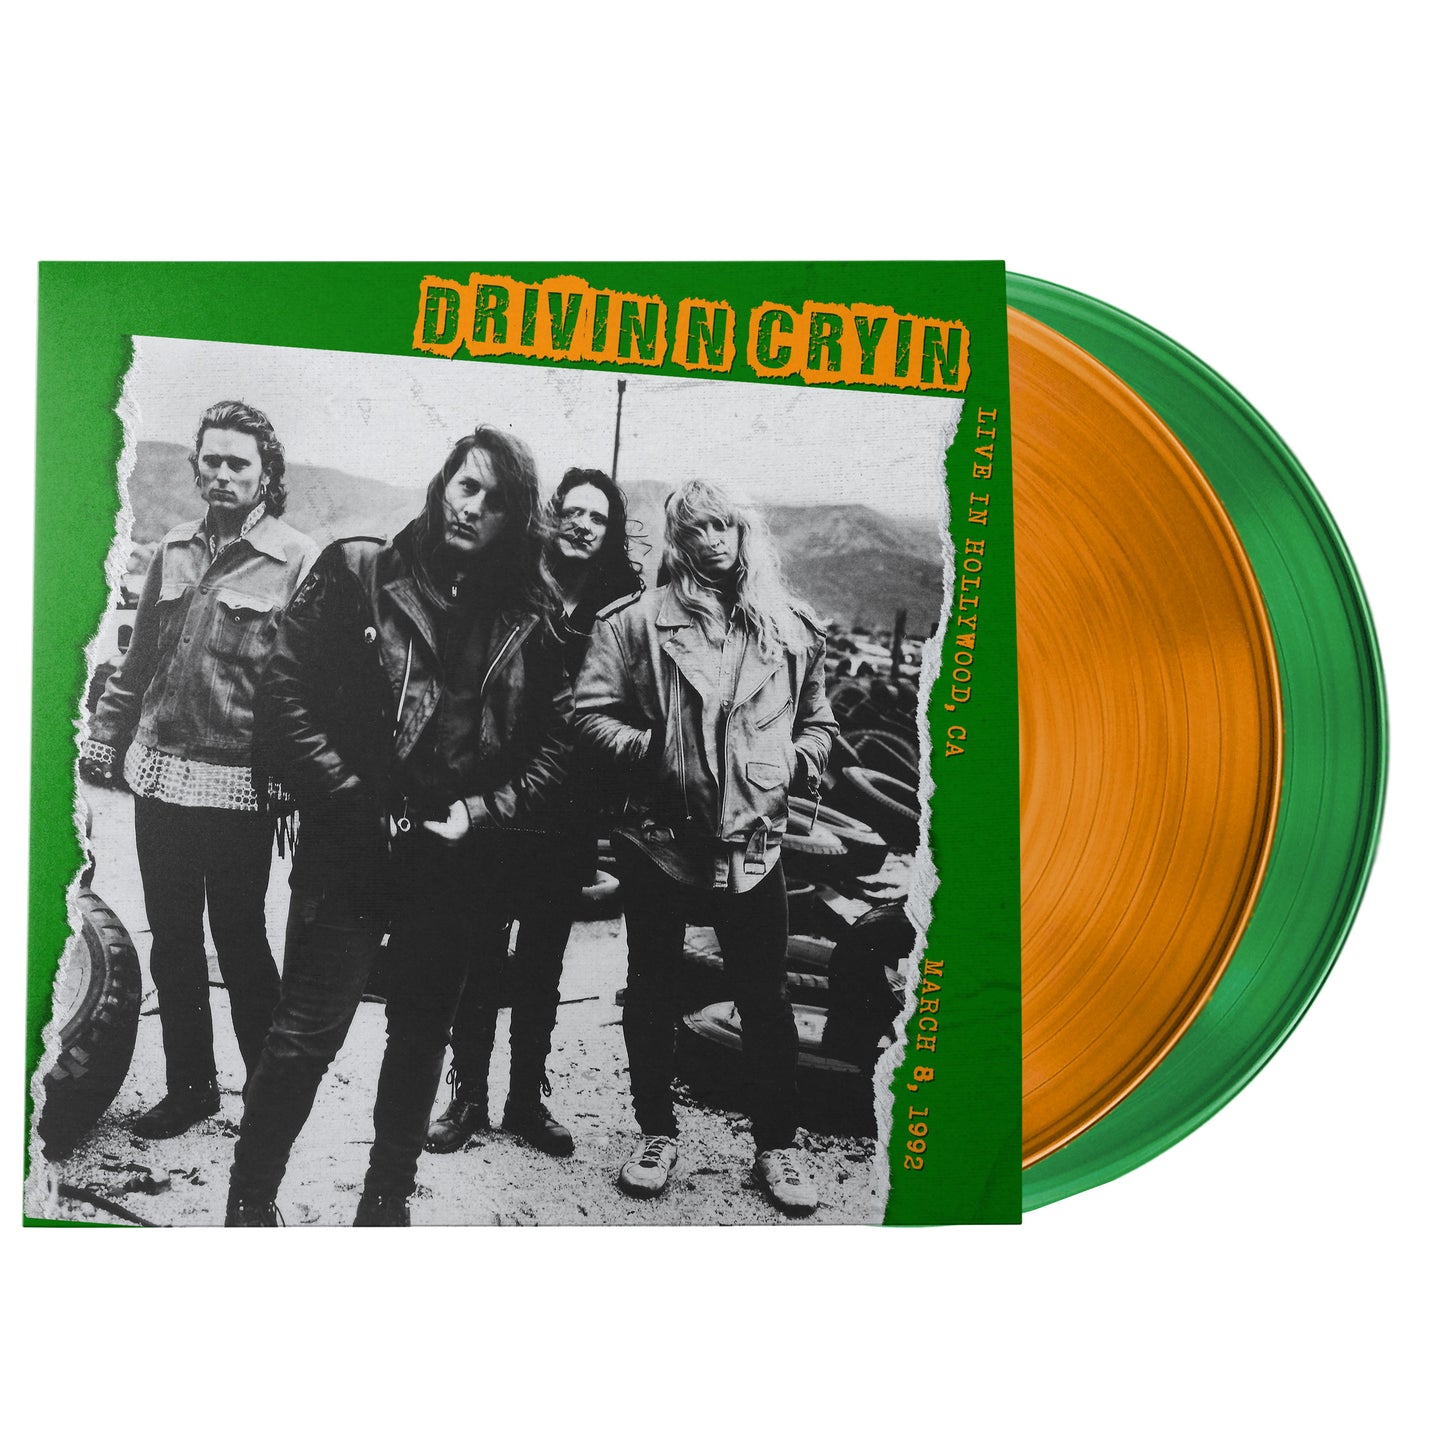 Live In Hollywood | March 8, 1992 (Limited Edition | 2LP Translucent Green & Orange Vinyl | Monostereo Exclusive)